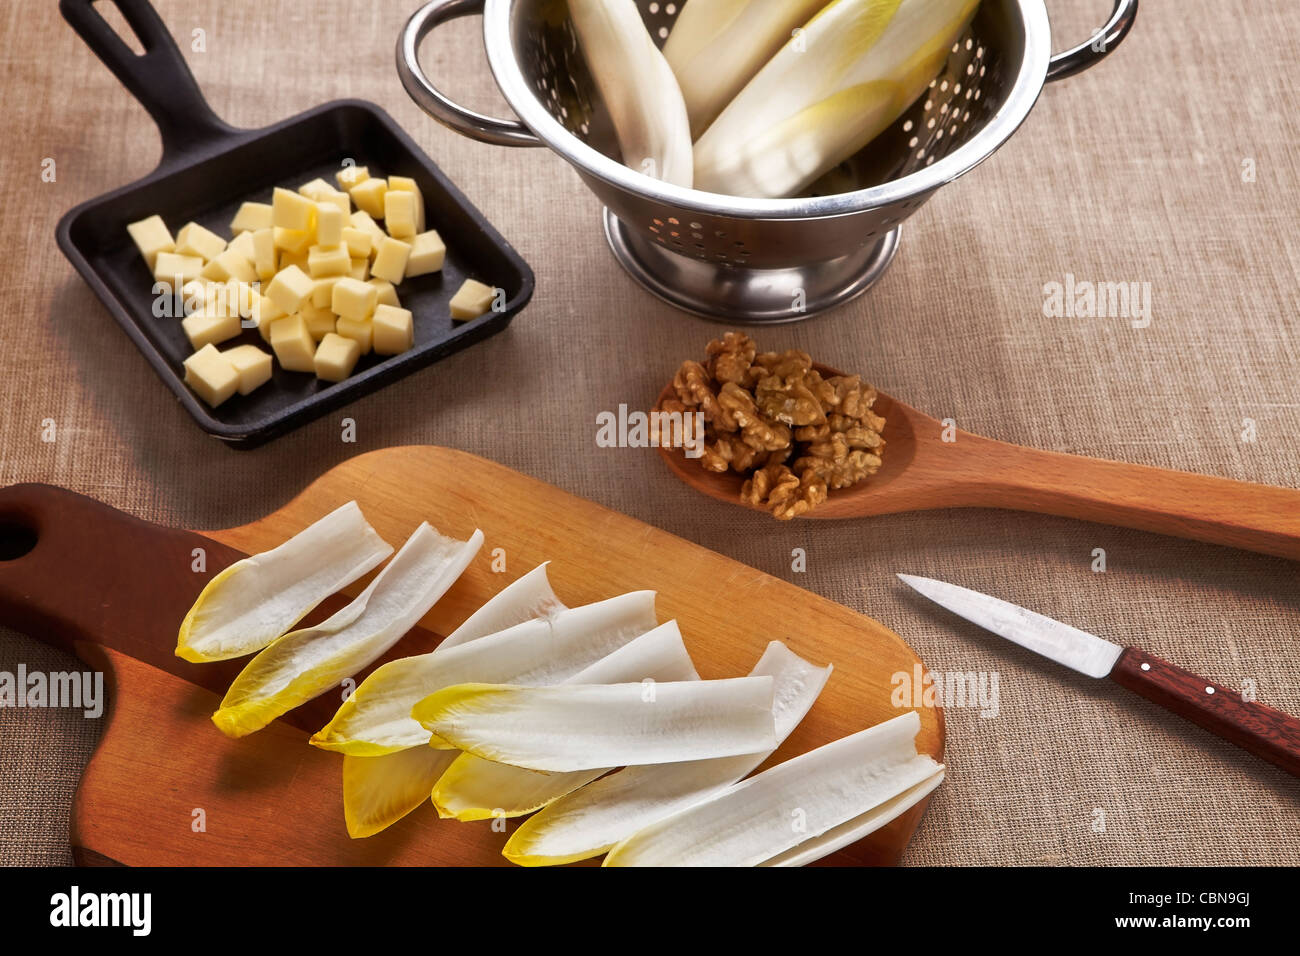 Ingredients for a salad with chicory, Swiss mountain cheese and walnuts  Stock Photo